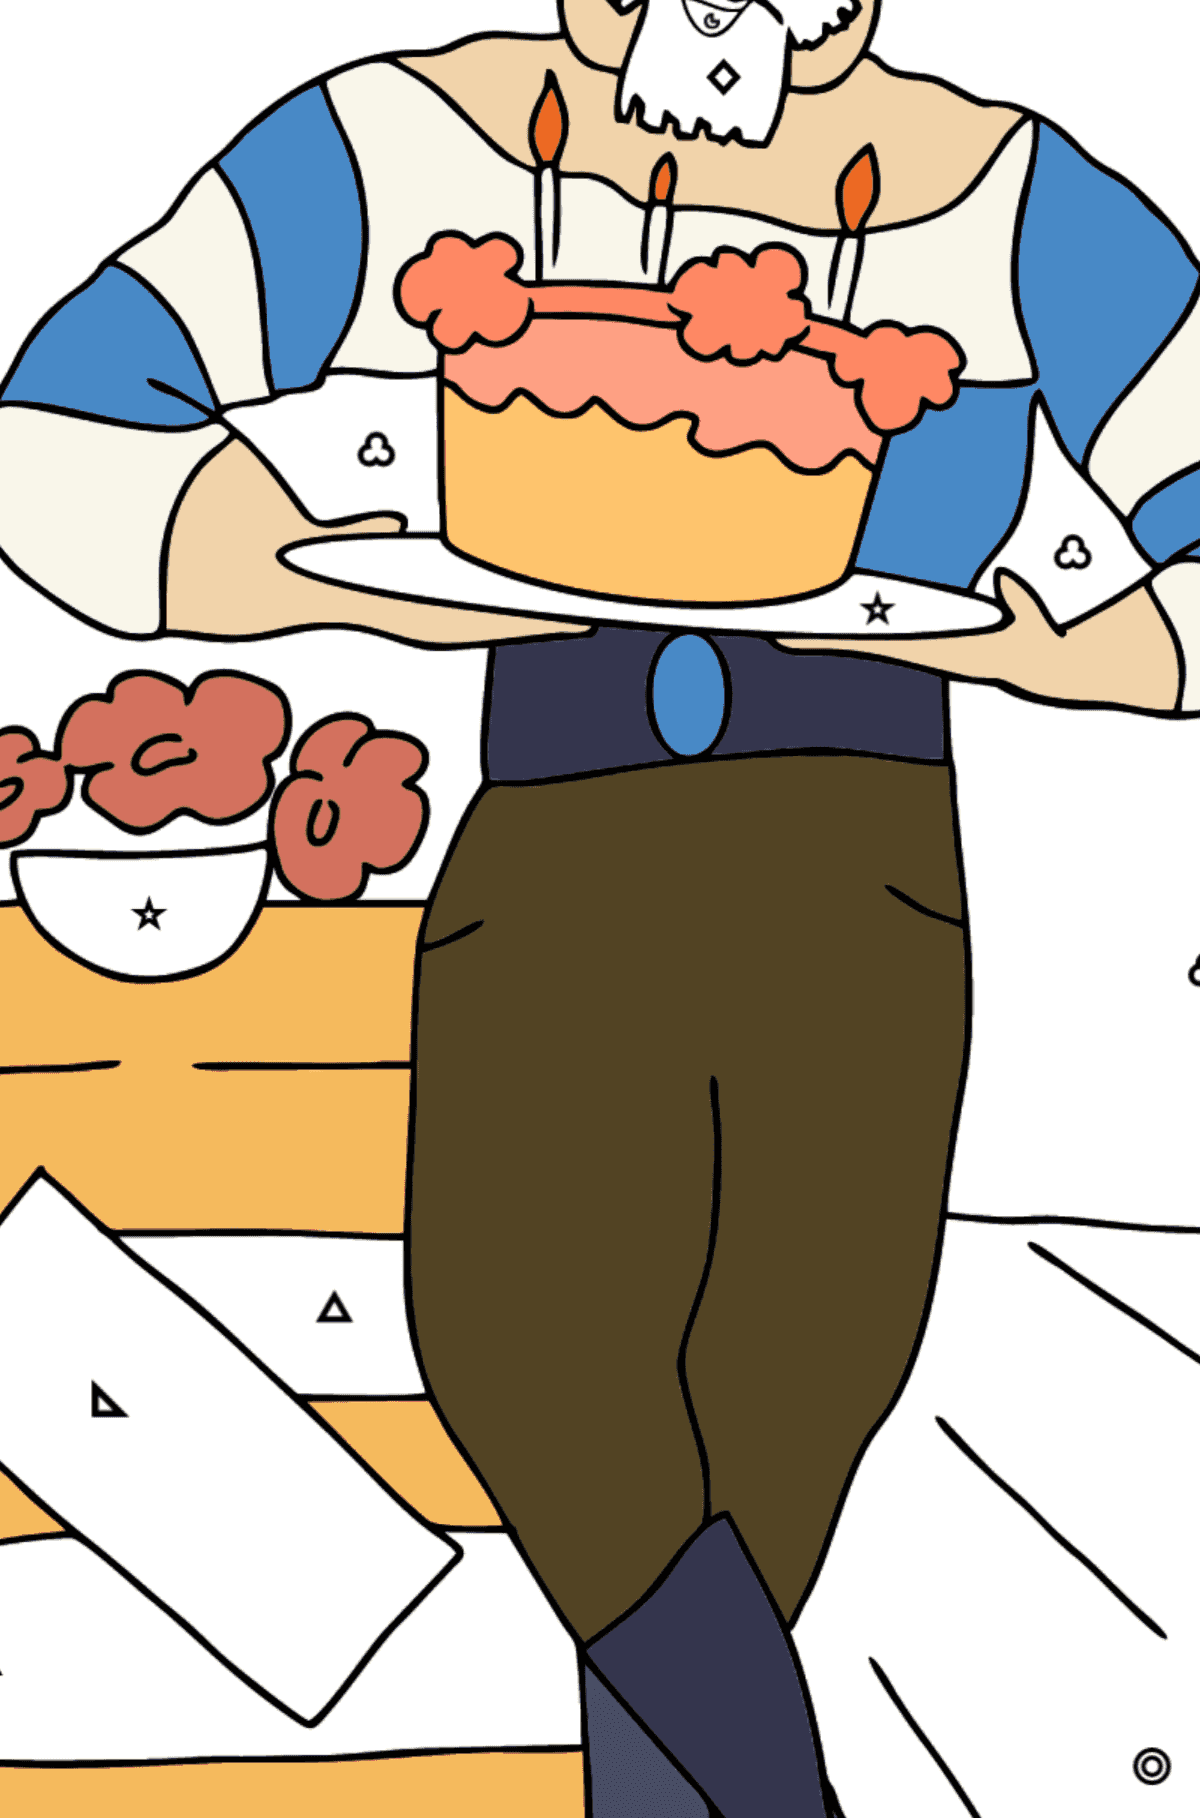 Coloring Page - A Pirate with Cake - Coloring by Geometric Shapes for Kids